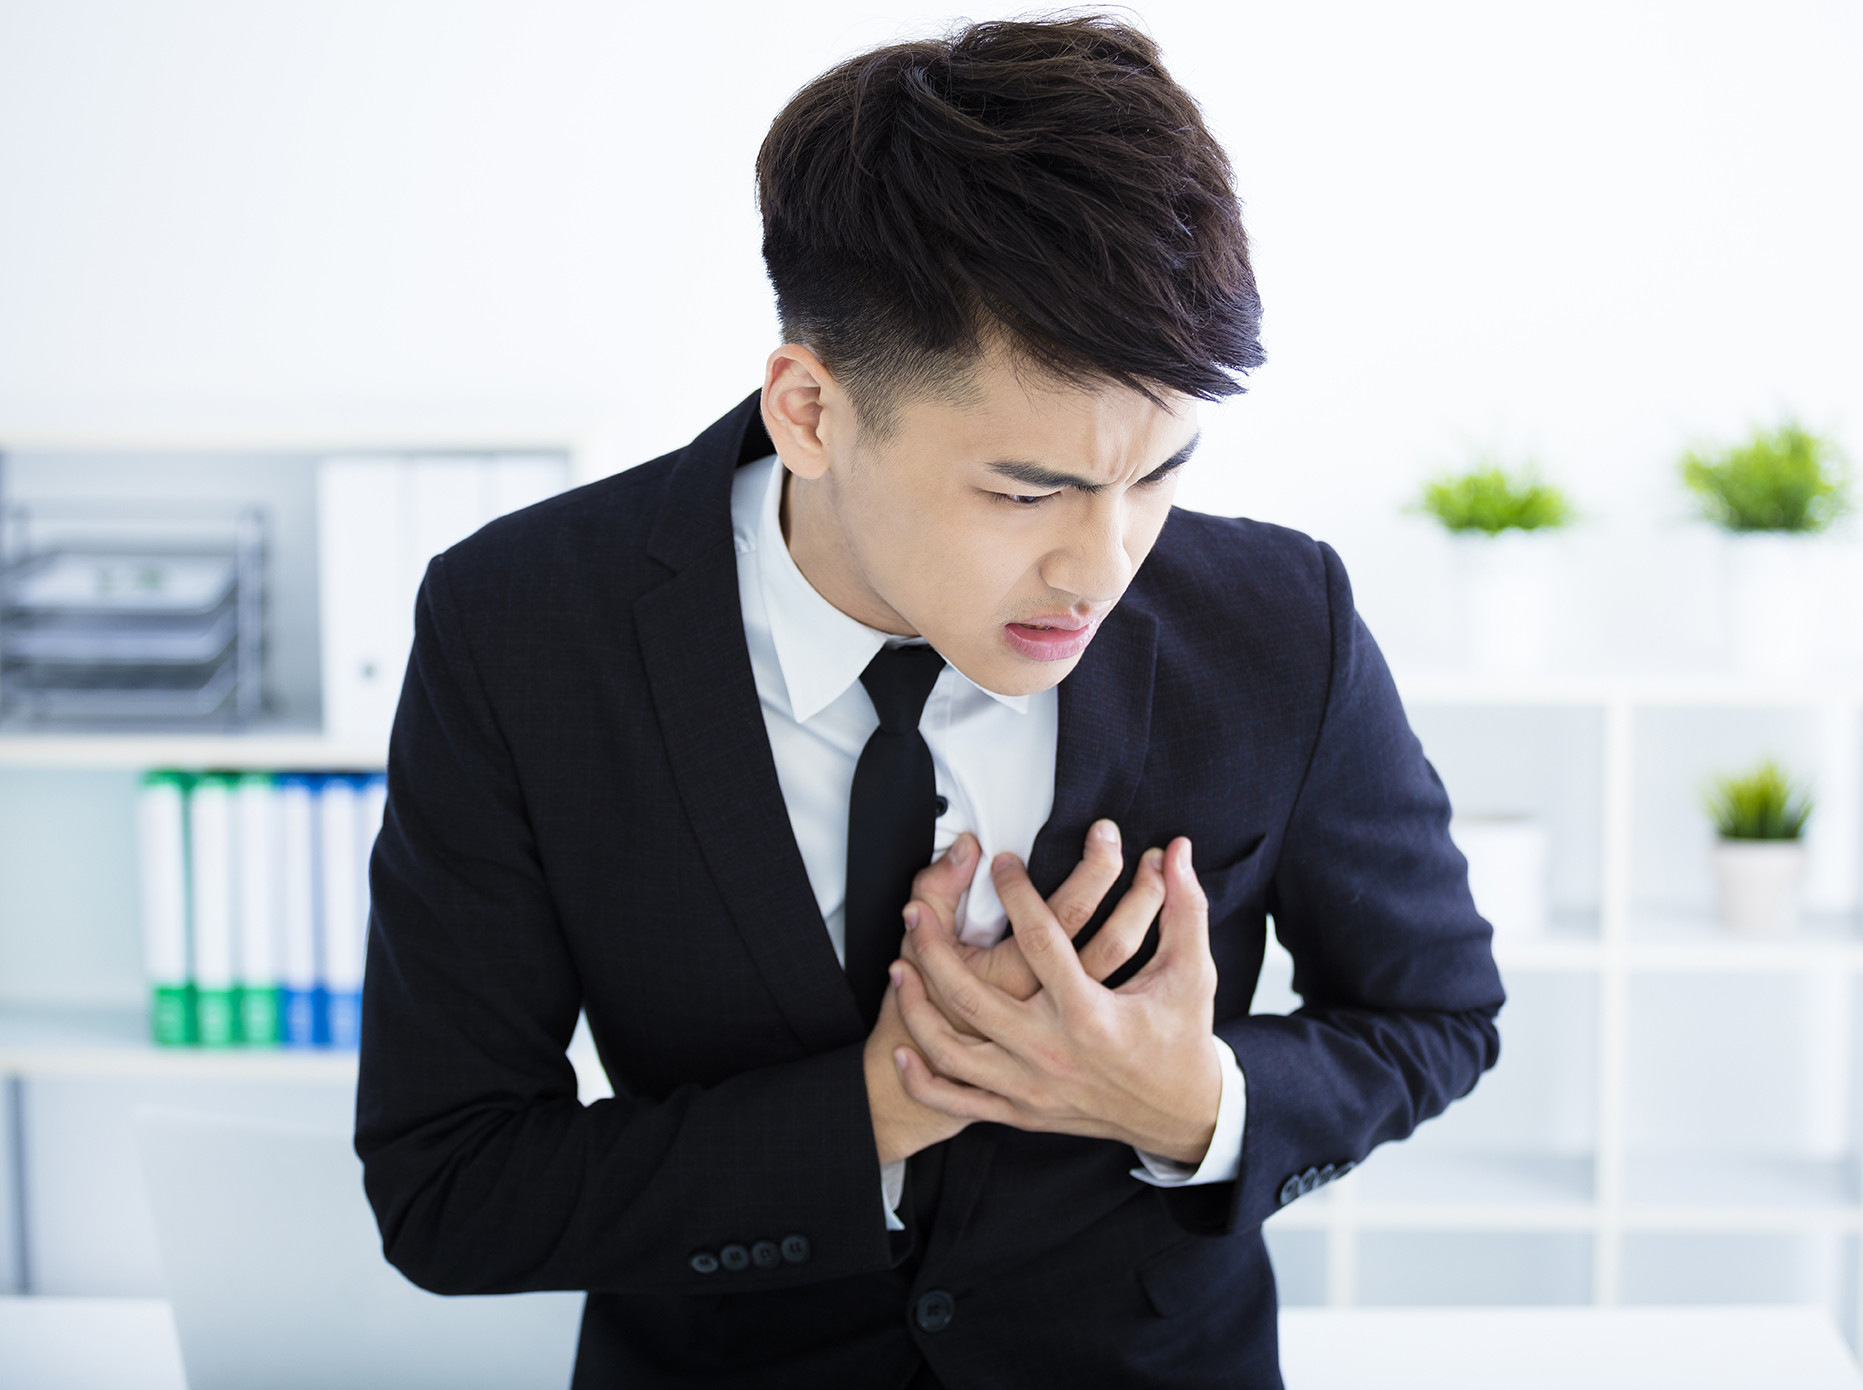 Young Adults at High Risk of Heart Disease